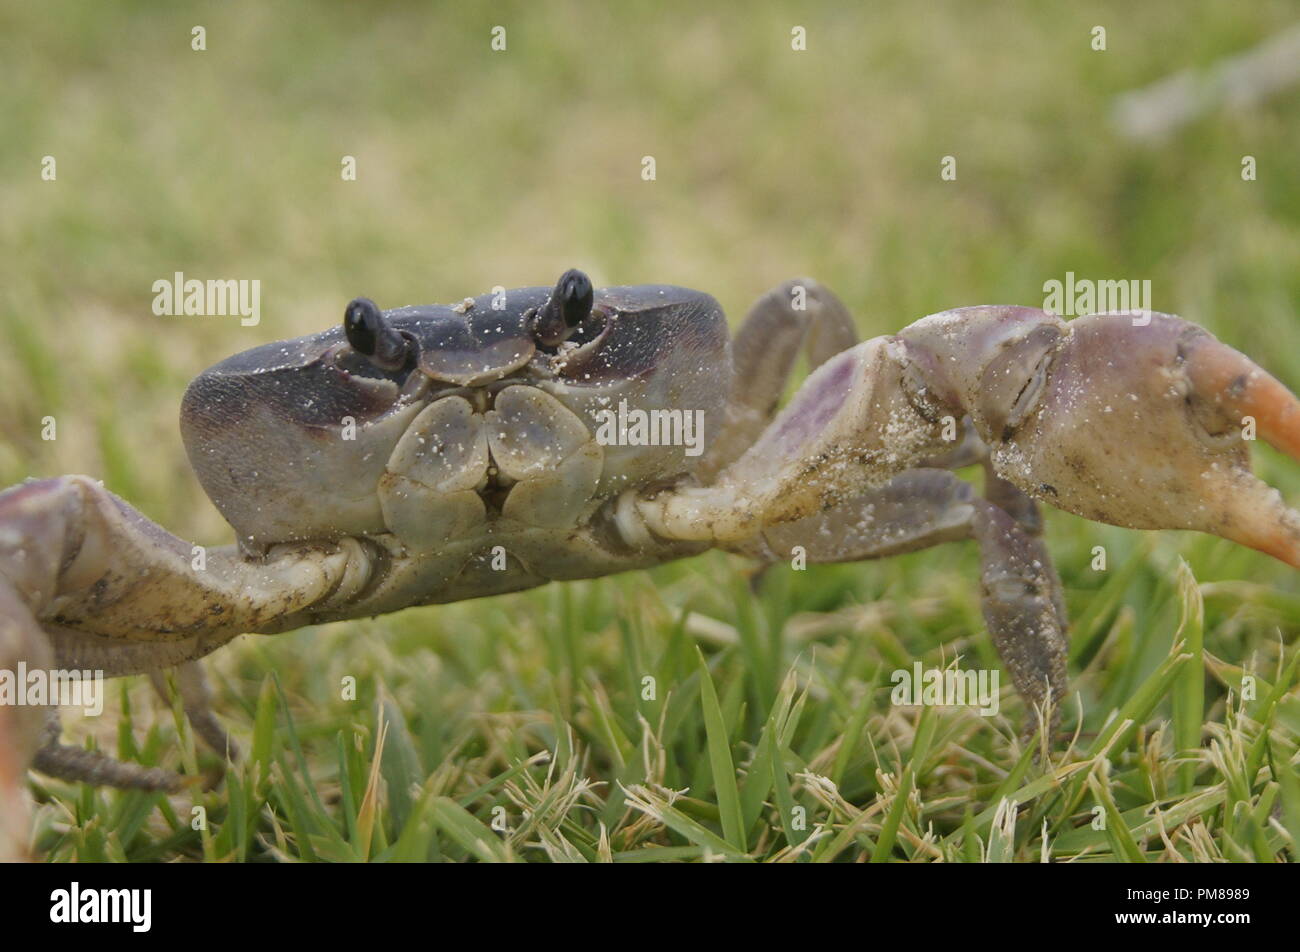 Cardisma guanhumi Small Caribbean blue land crab escaping from the camera on a grass patch Stock Photo